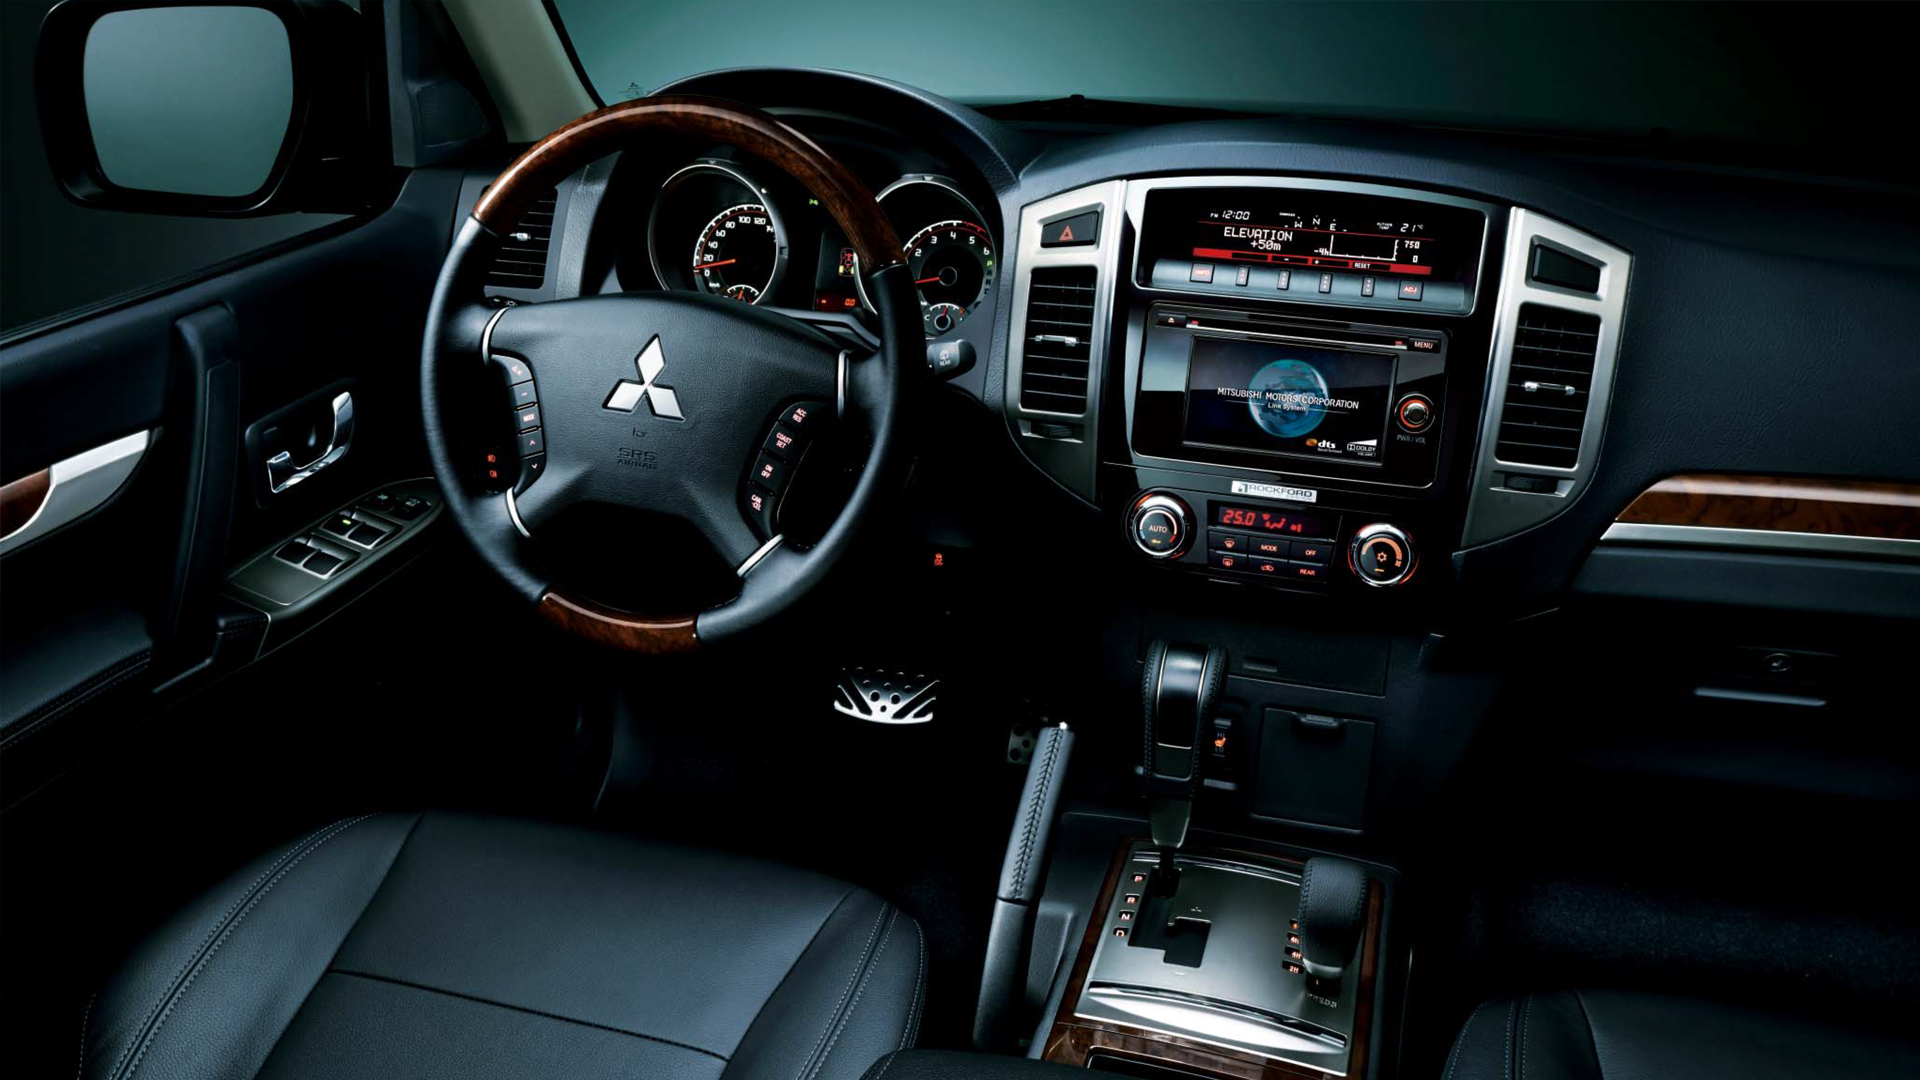 Mitsubishi Montero 2016 - Price in India, Mileage, Reviews, Colours,  Specification, Images - Overdrive